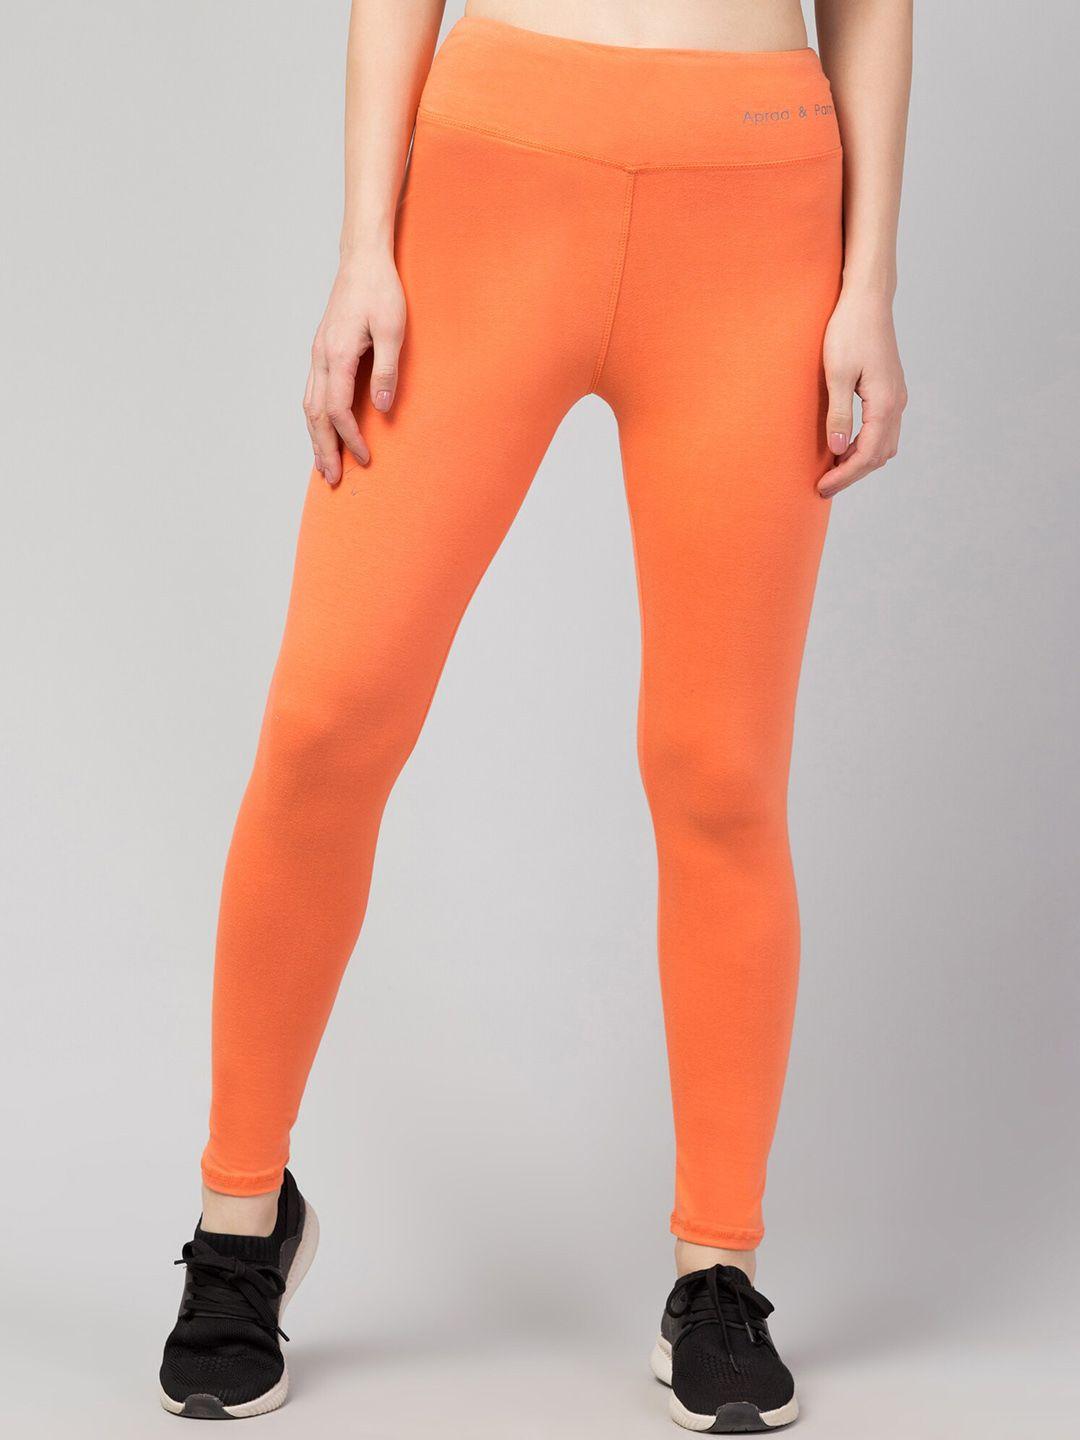 apraa & parma ankle length sports tights